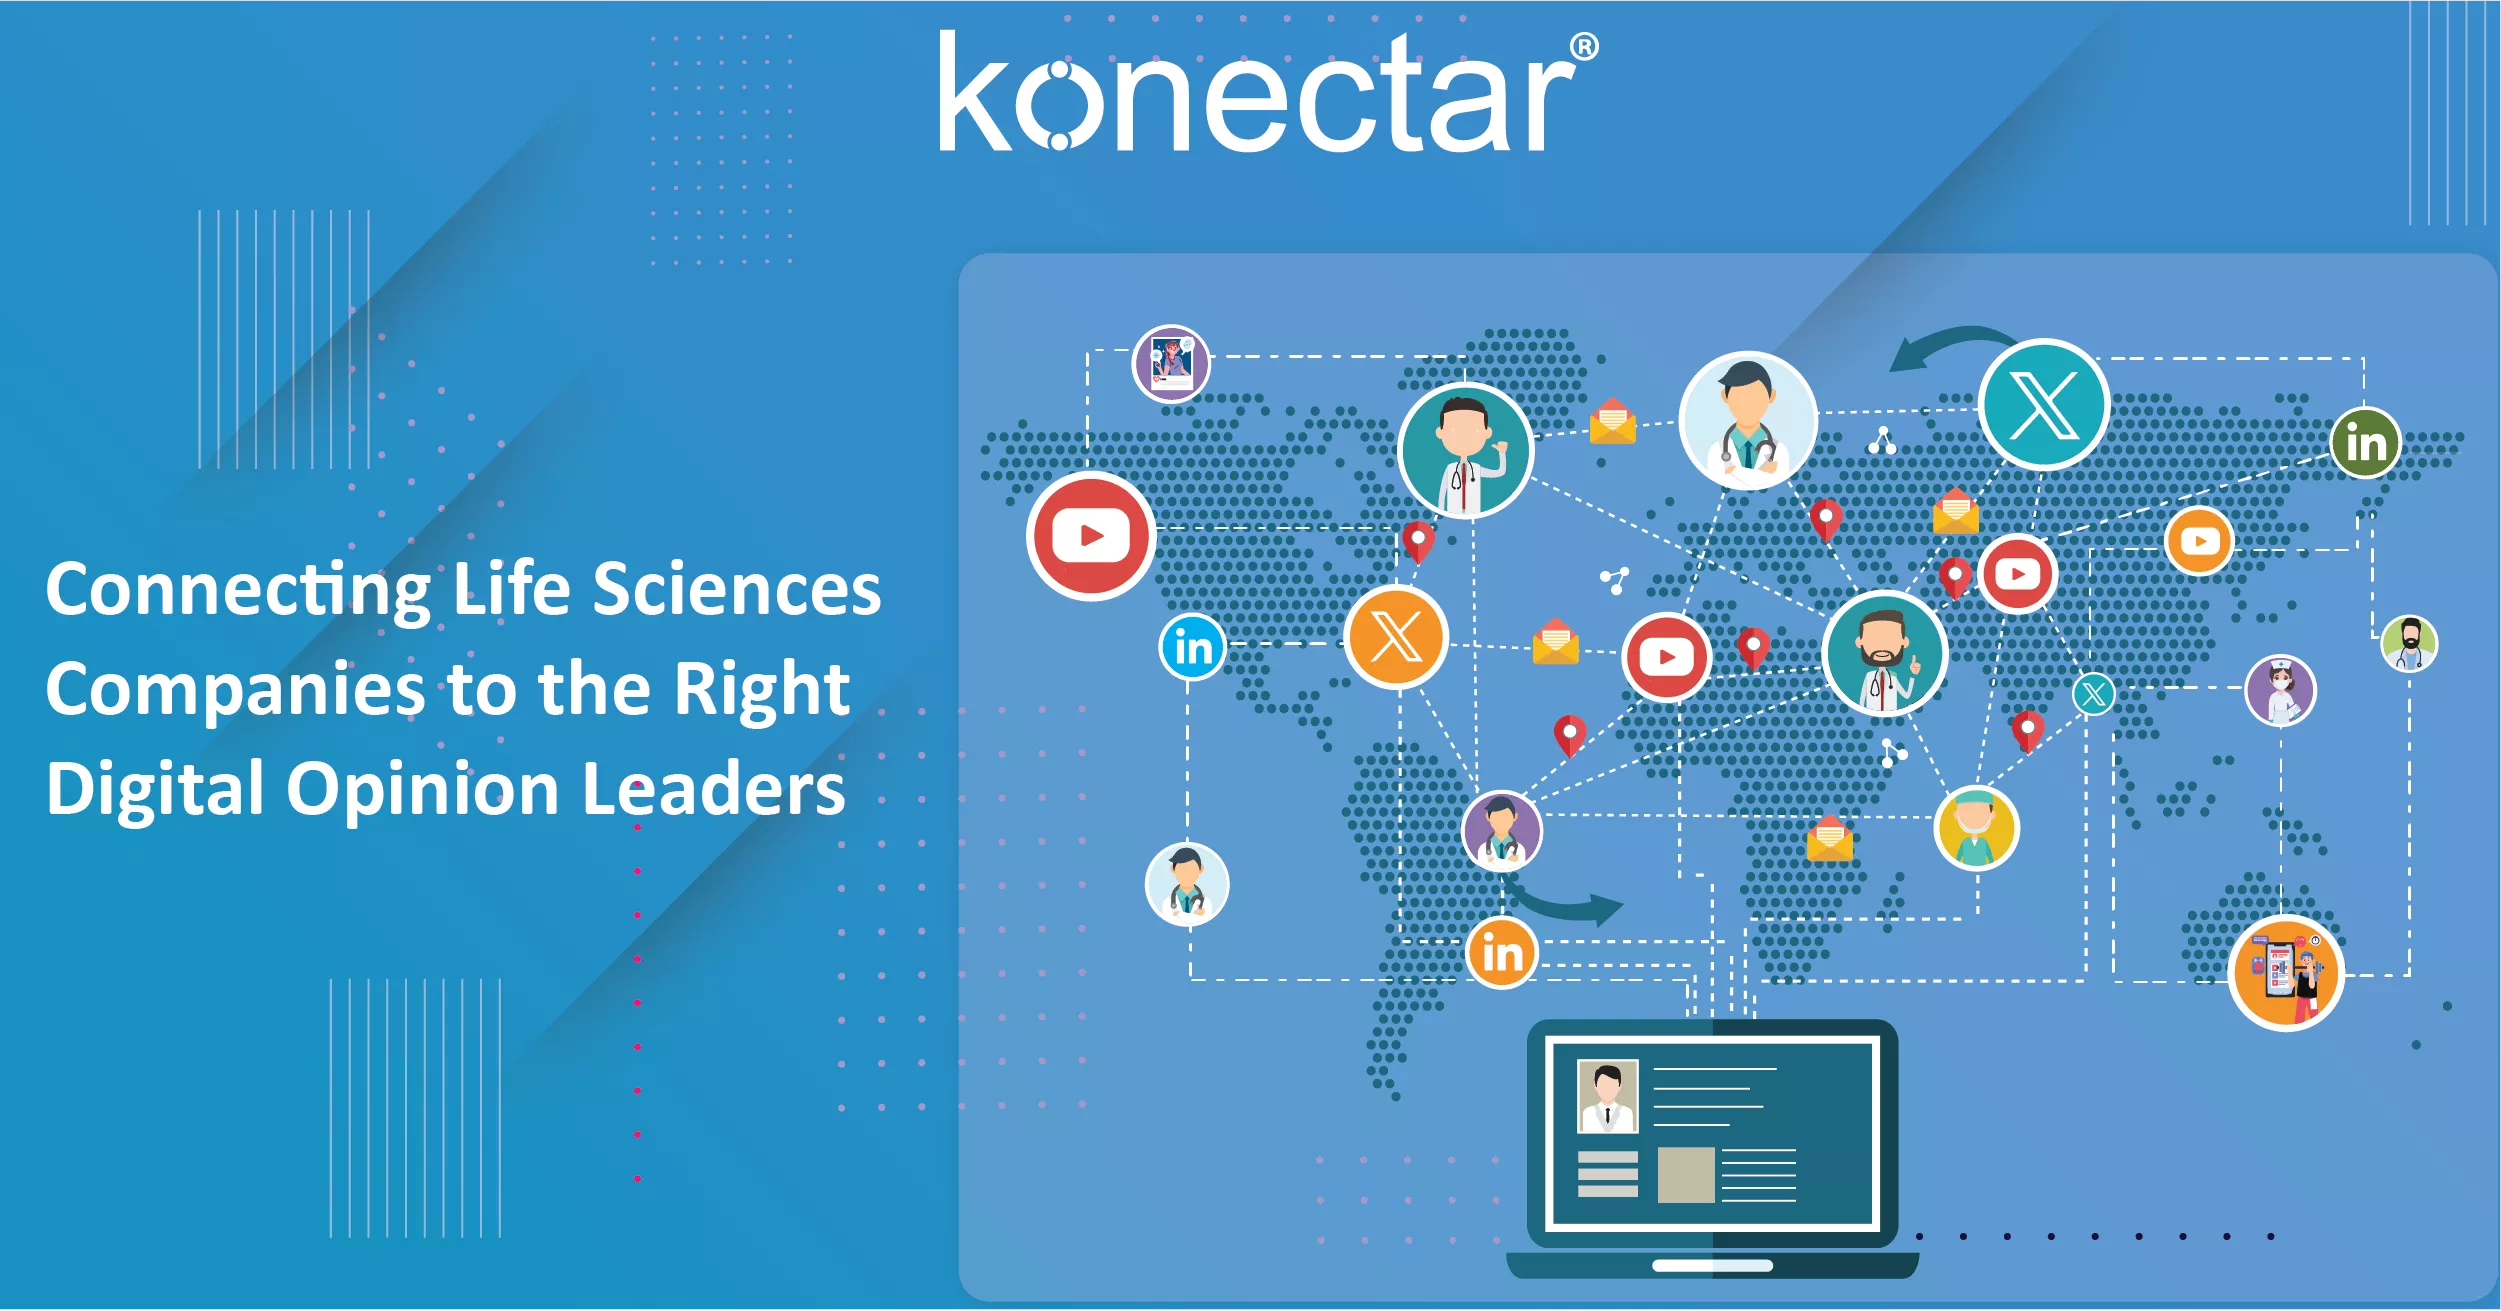 konectar Social - Connecting Life Sciences companies to the right Digital Opinion Leaders